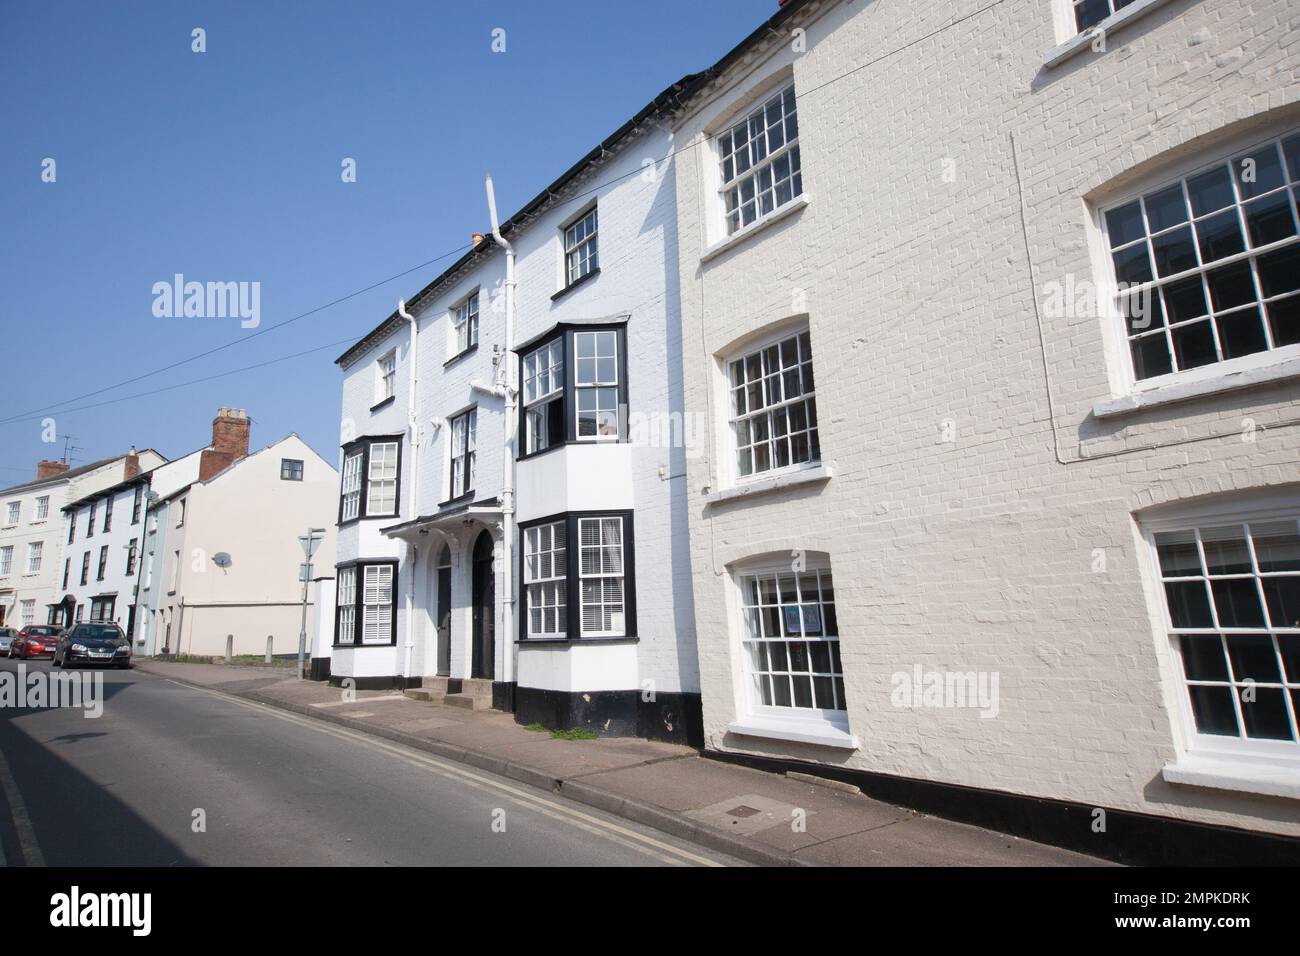 Views of Ross-on-Wye in Herefordshire in the UK Stock Photo